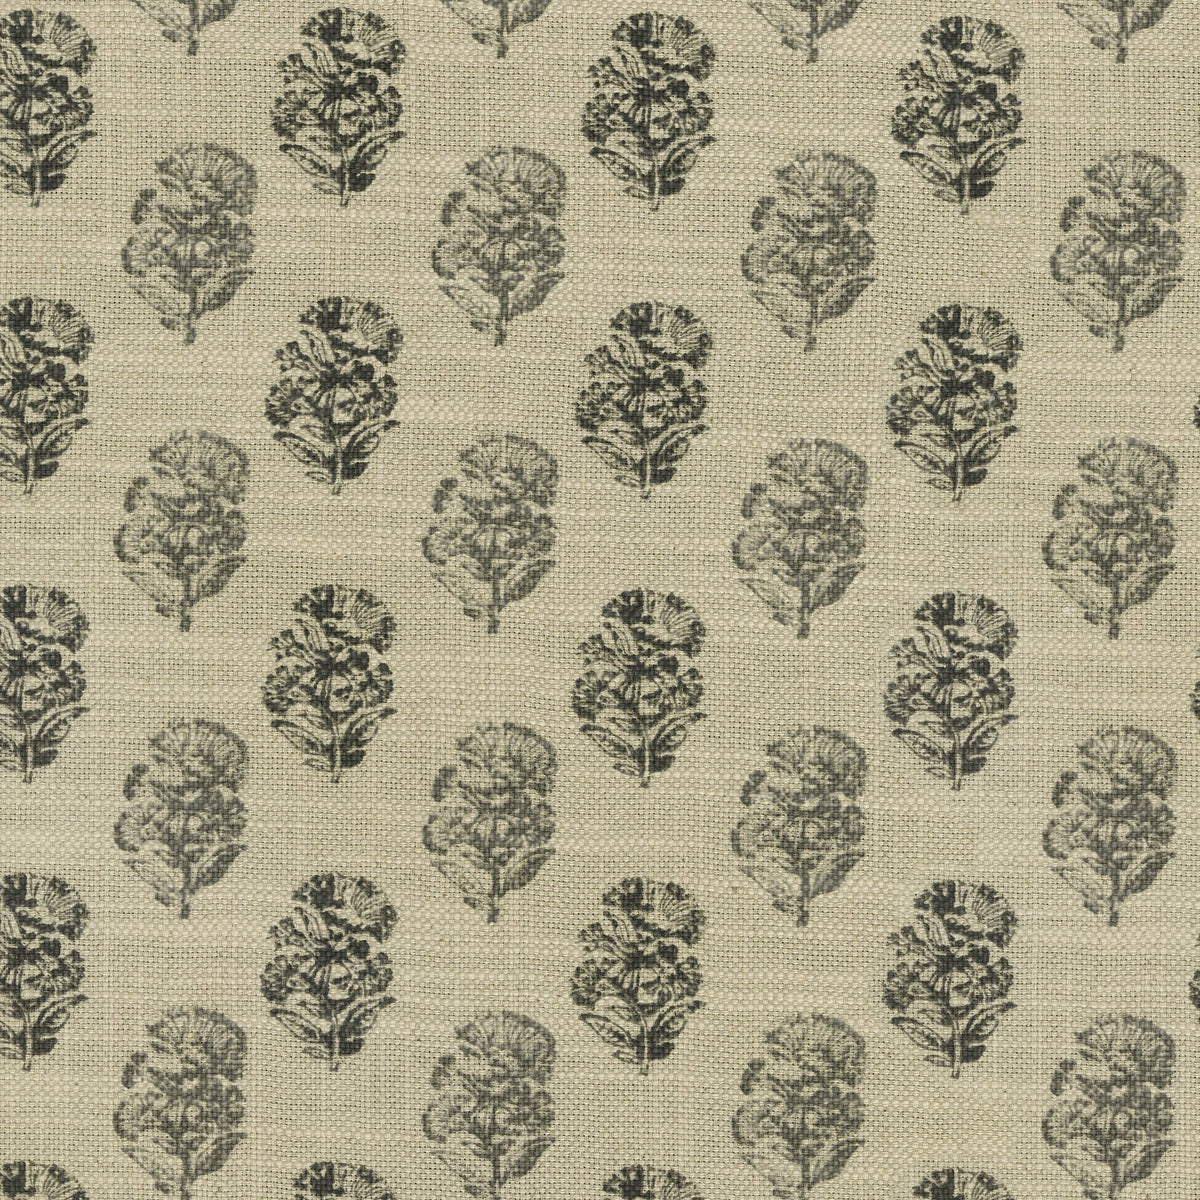 P/K Lifestyles Posy - Charcoal 410423 Fabric Swatch